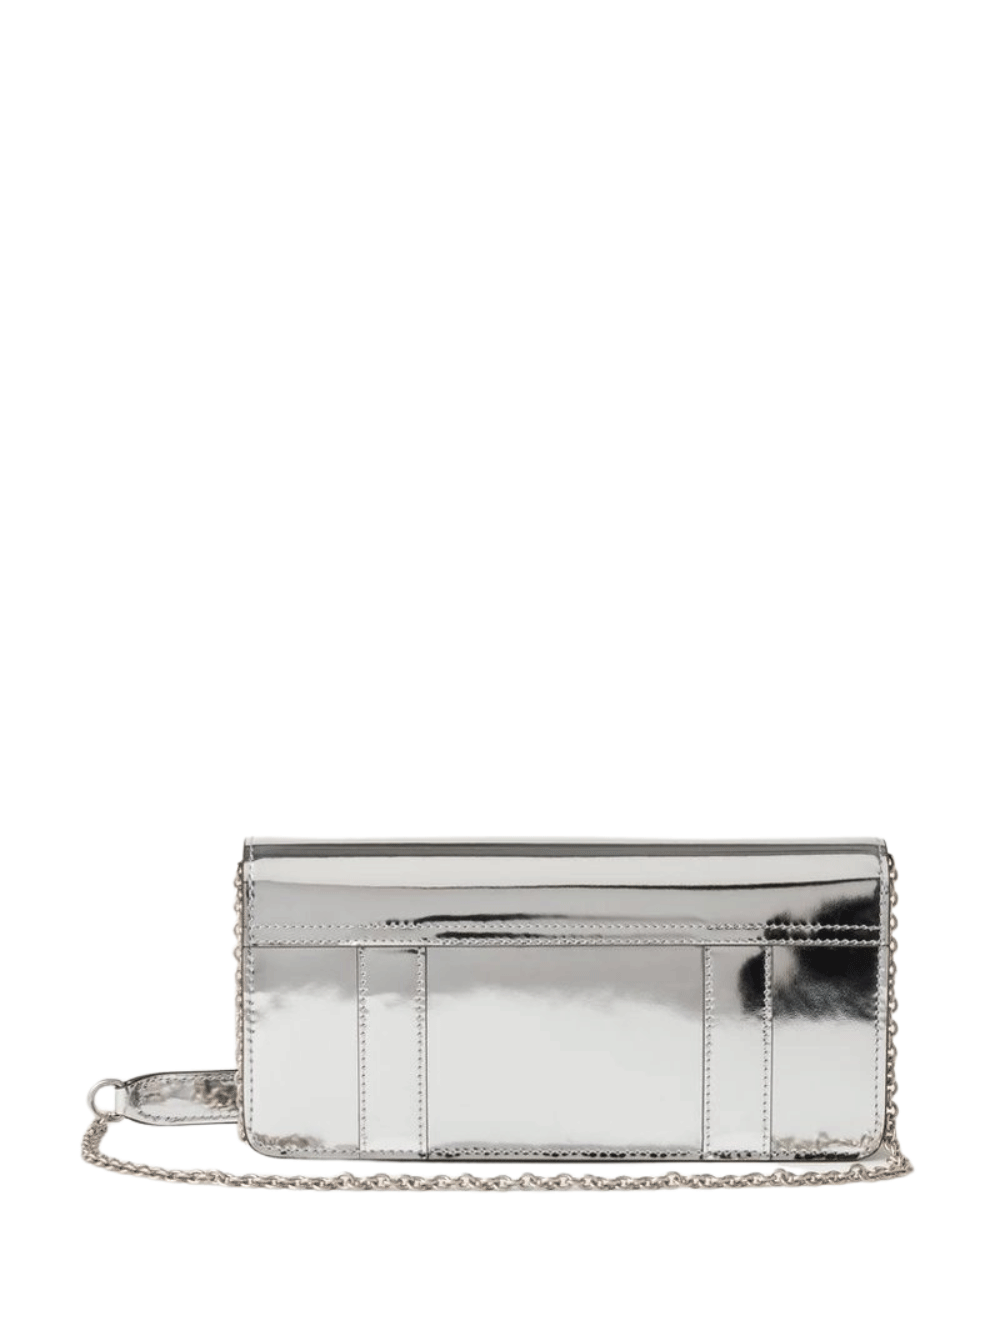 Mulberry-EastWestBayswaterClutchMirrorPlainVersion-Silver-2